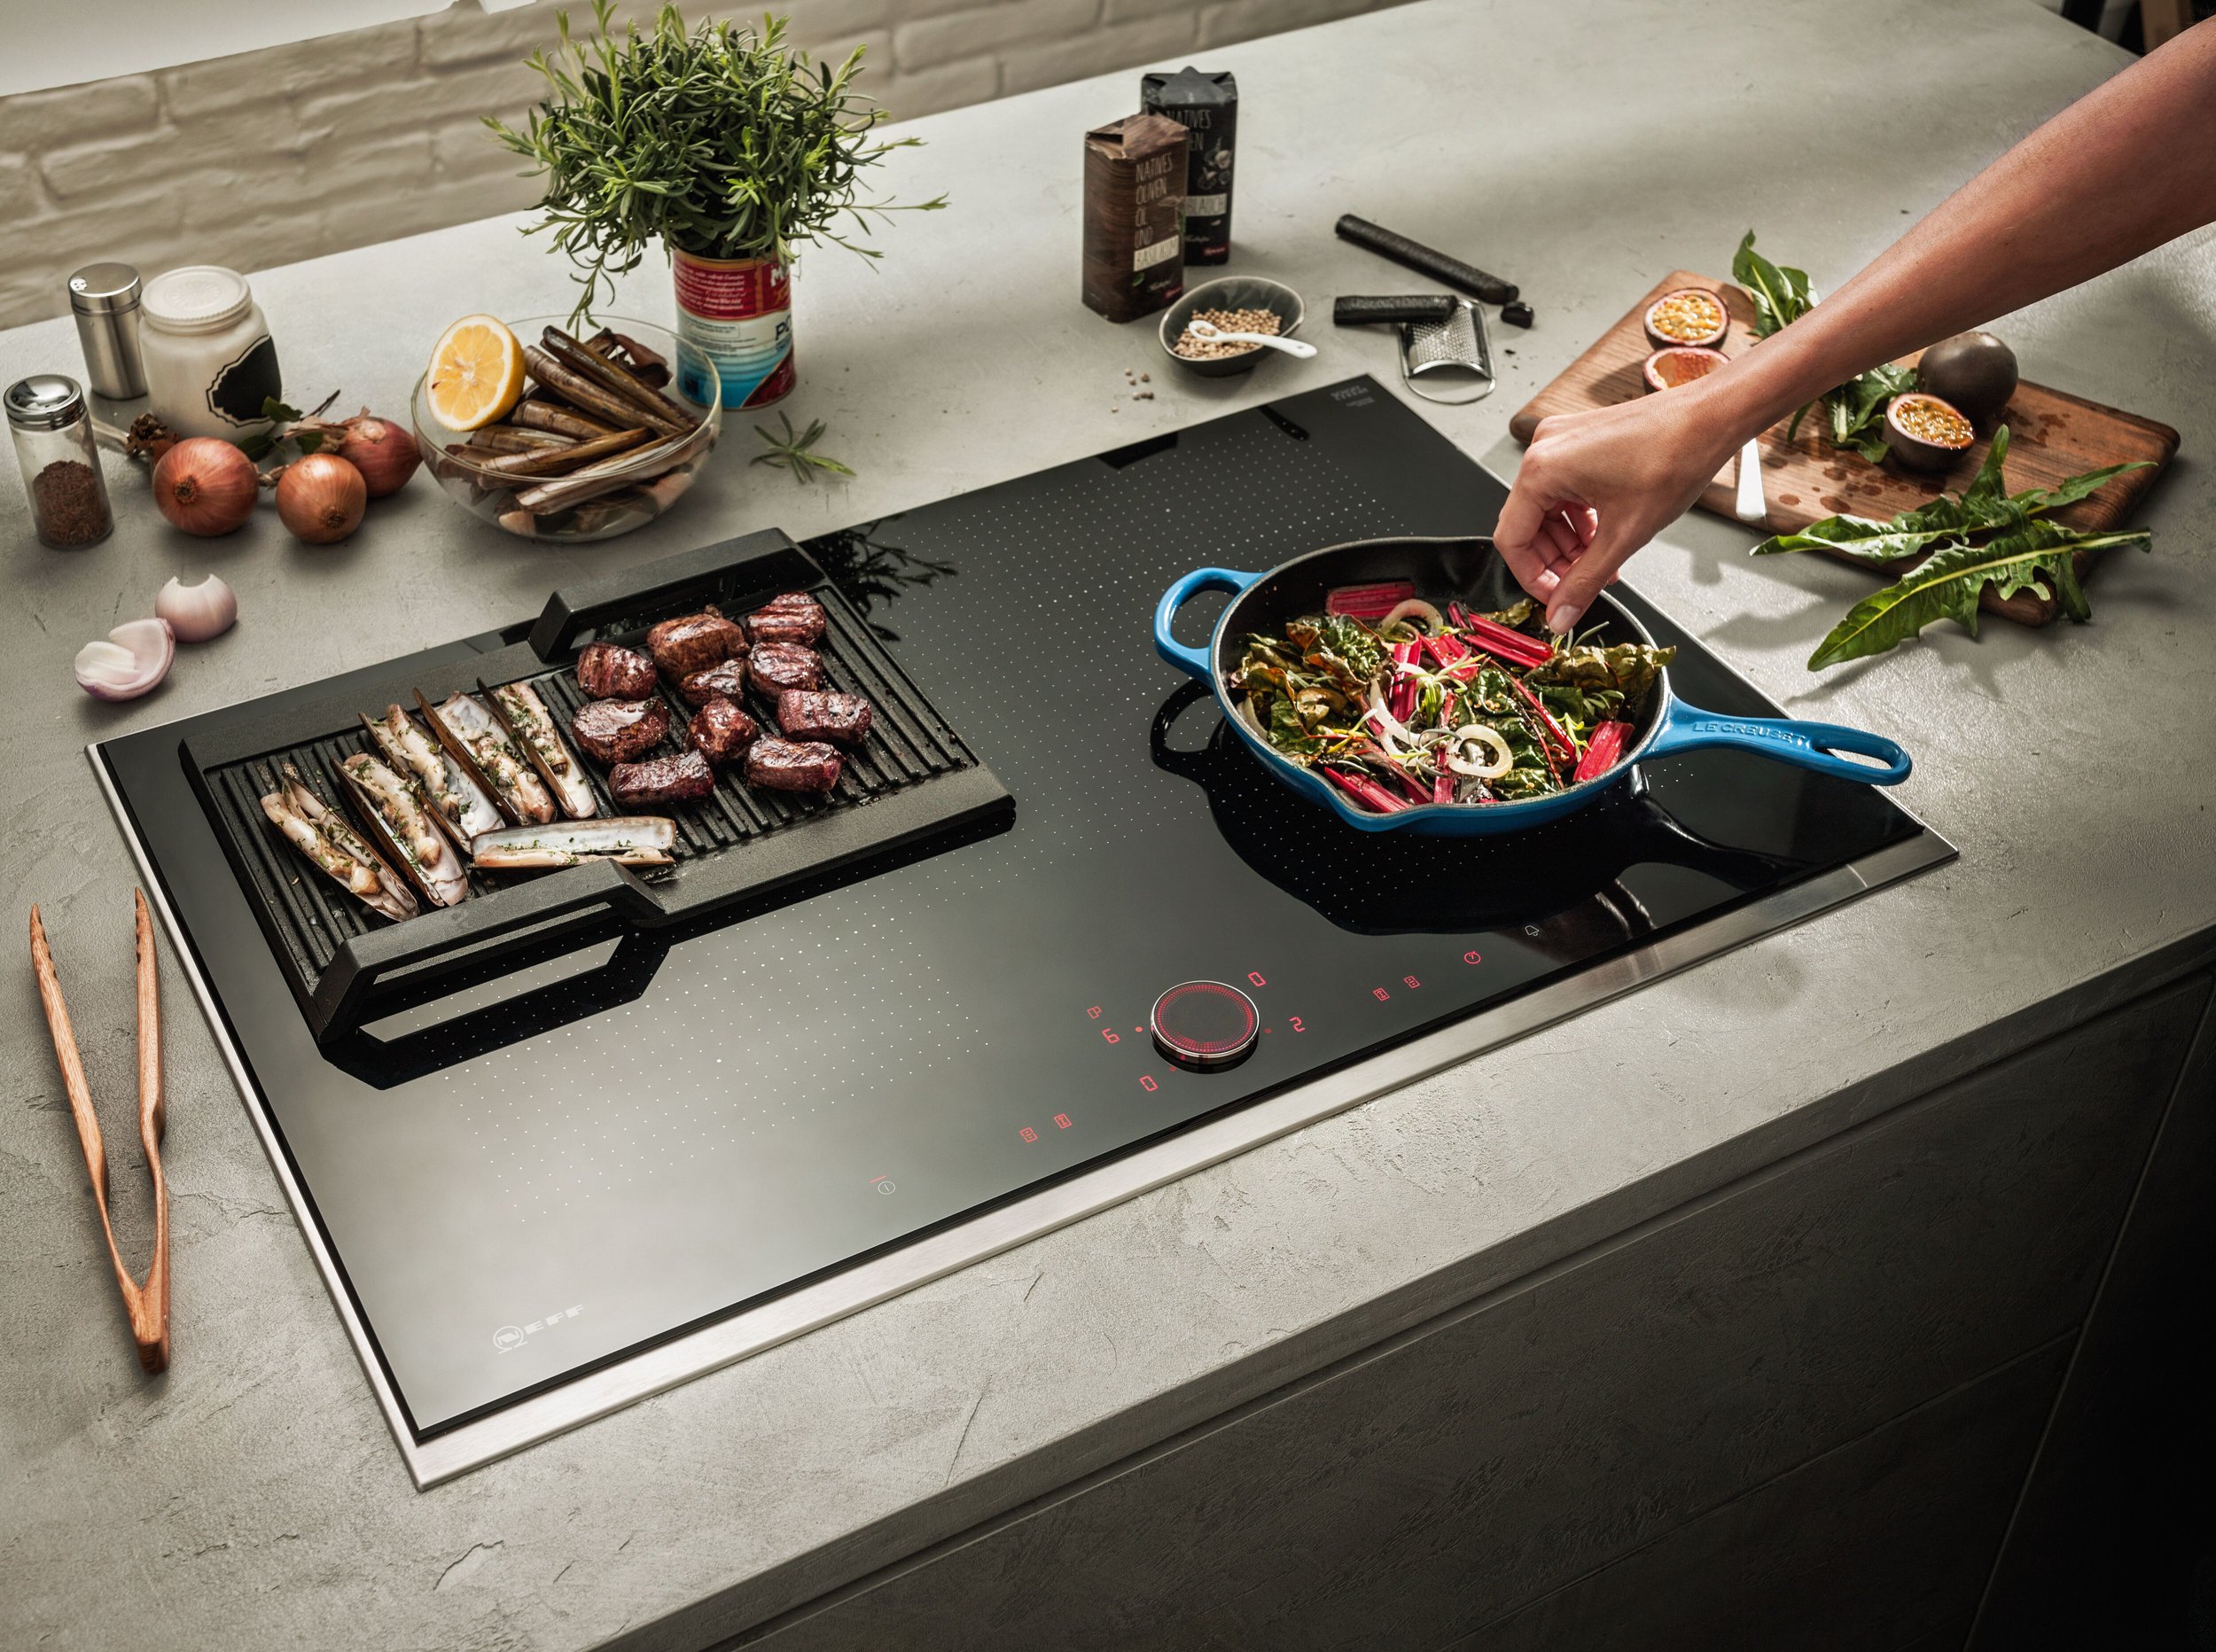 T68TS61N0_Induk_MC_Cooktop_with_Food2_Hand_901_87554_RZ1.jpg